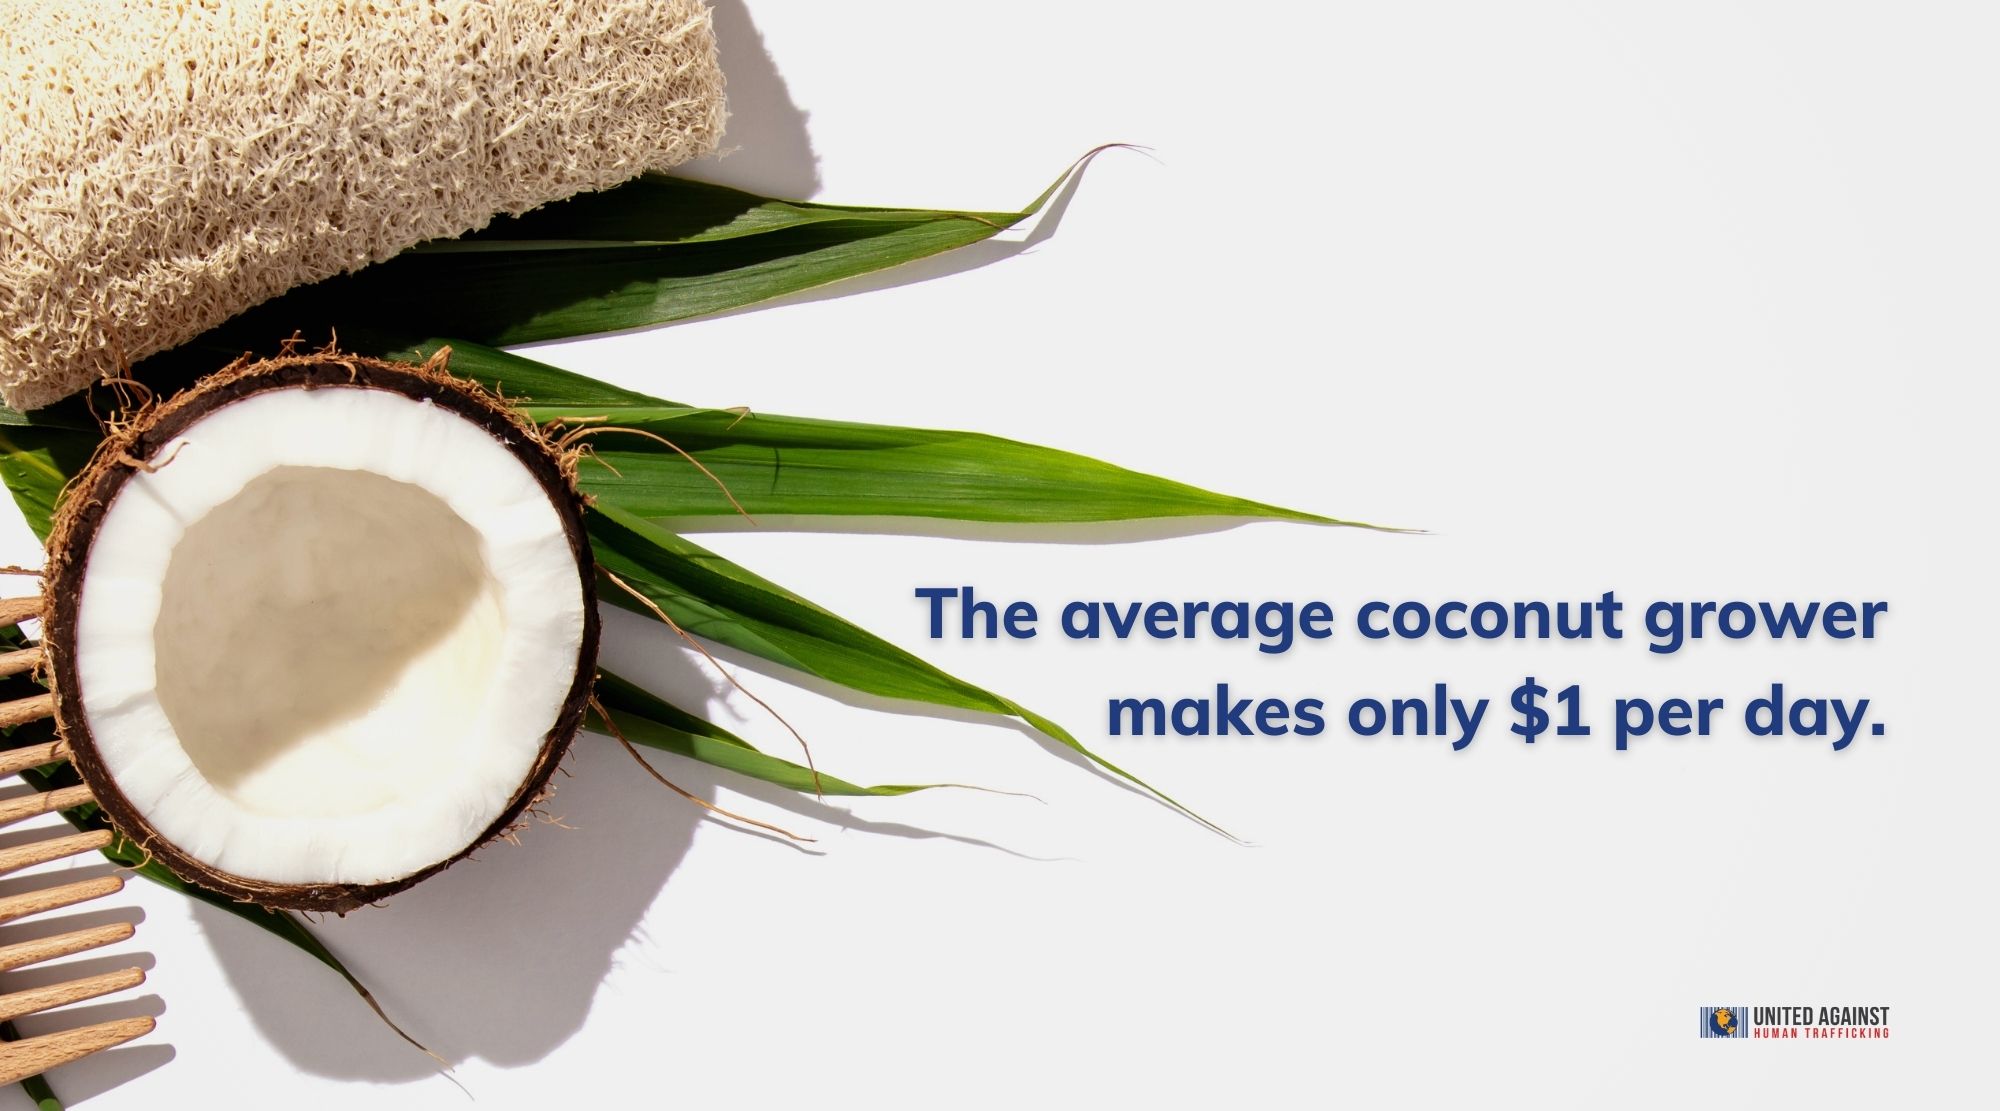 The average coconut grower makes only $1 per day